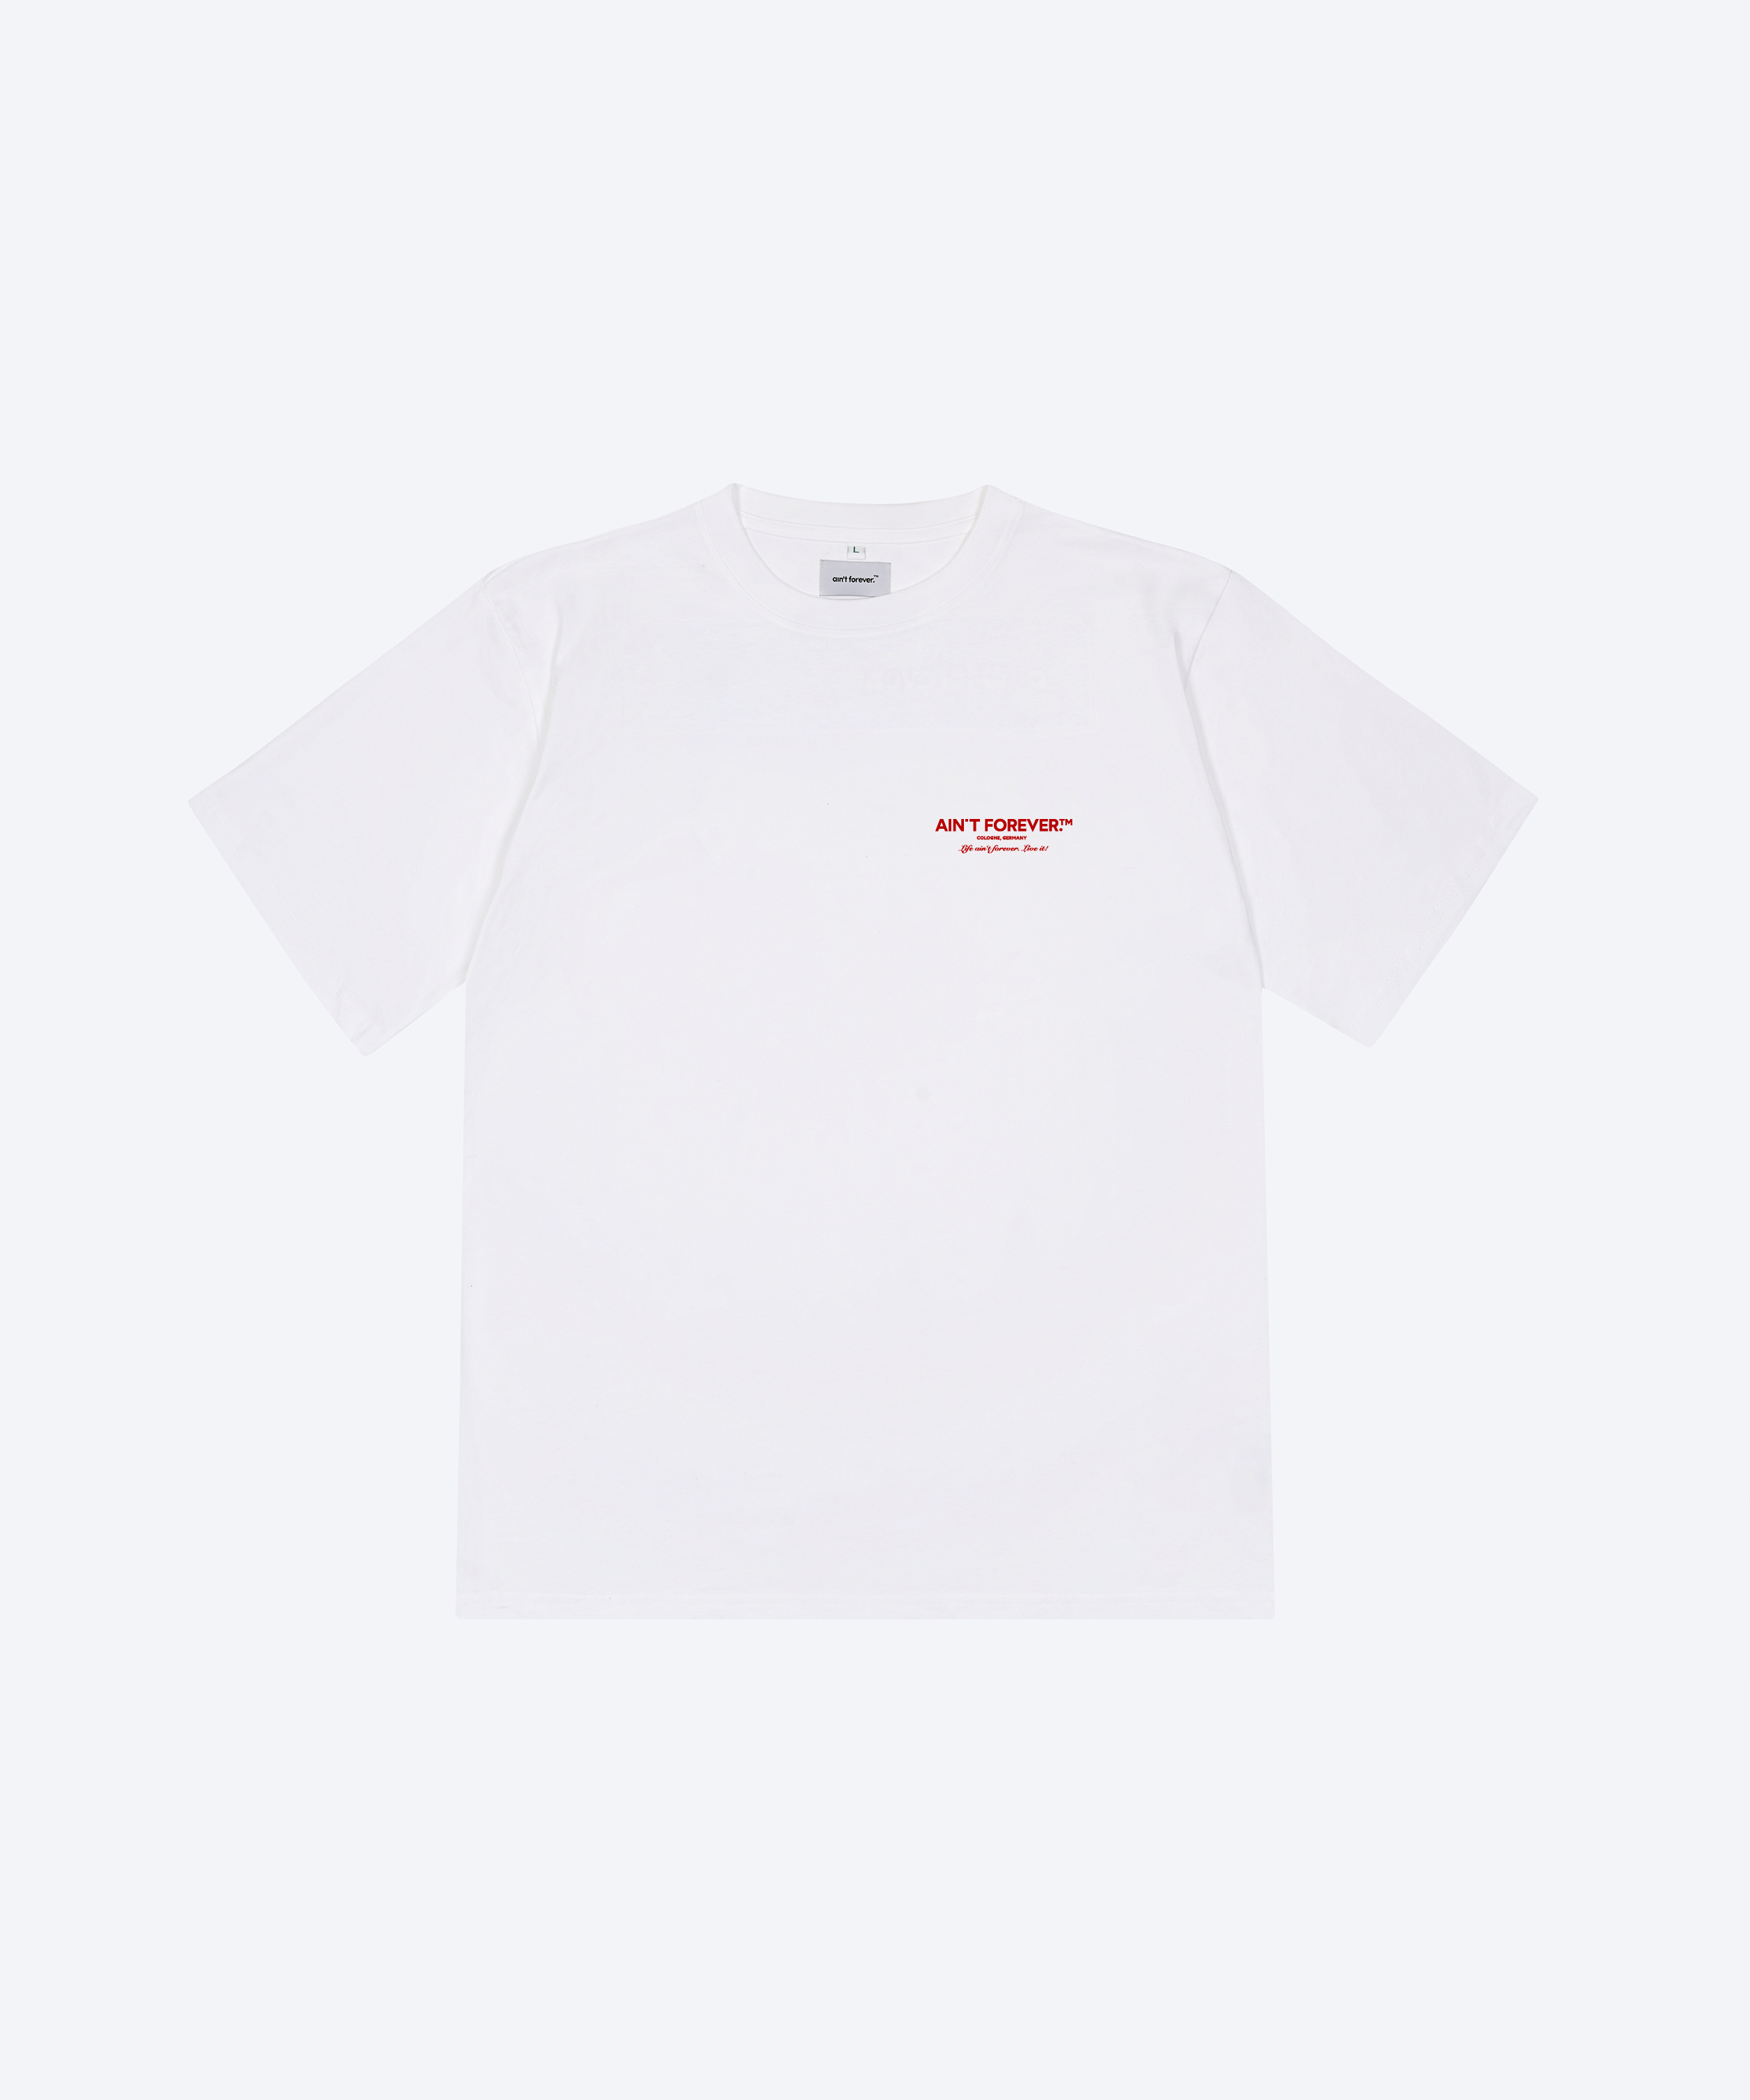 THE LIVE IT! T-SHIRT (WHITE / RED)